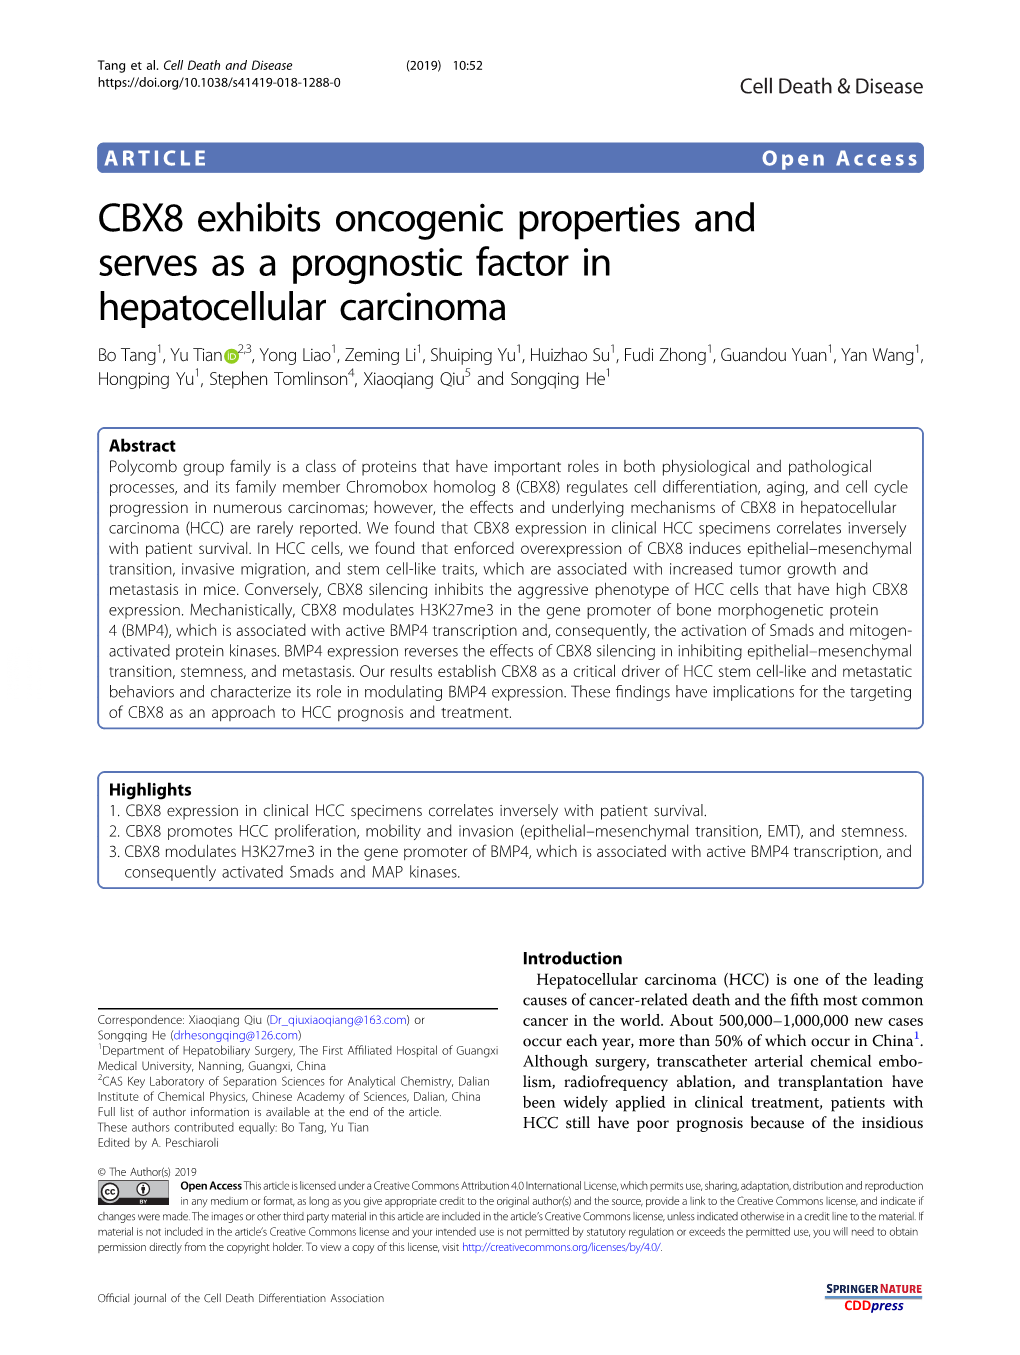 CBX8 Exhibits Oncogenic Properties and Serves As a Prognostic Factor In